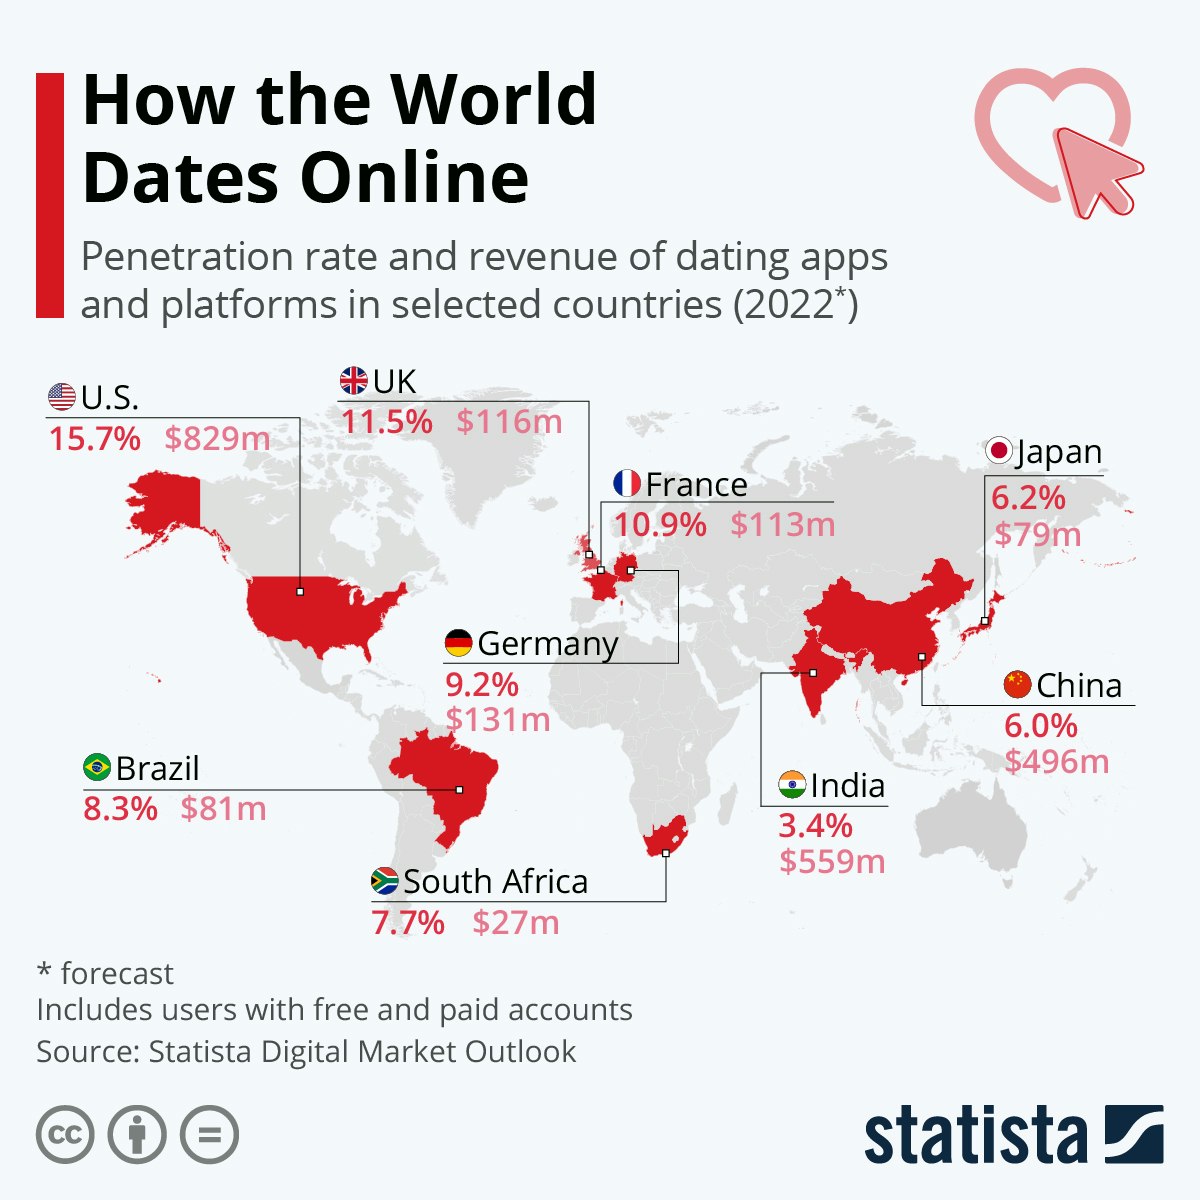 Statista graph showing the number of dating app users and revenue per country on a world map illustration